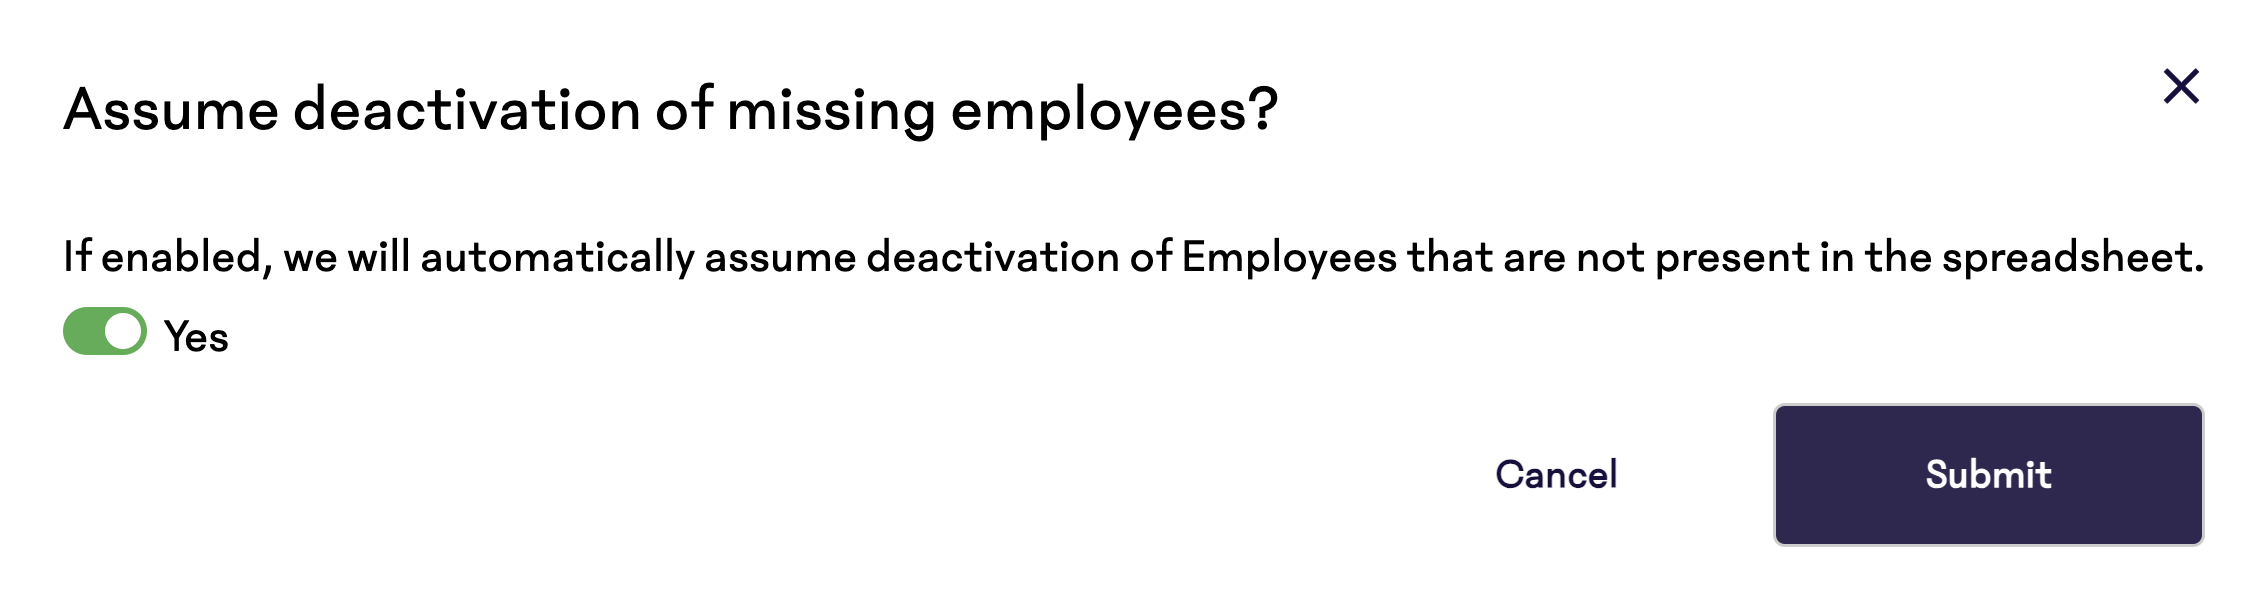 Assume-Deactivation-Of-Missing-Employes.png